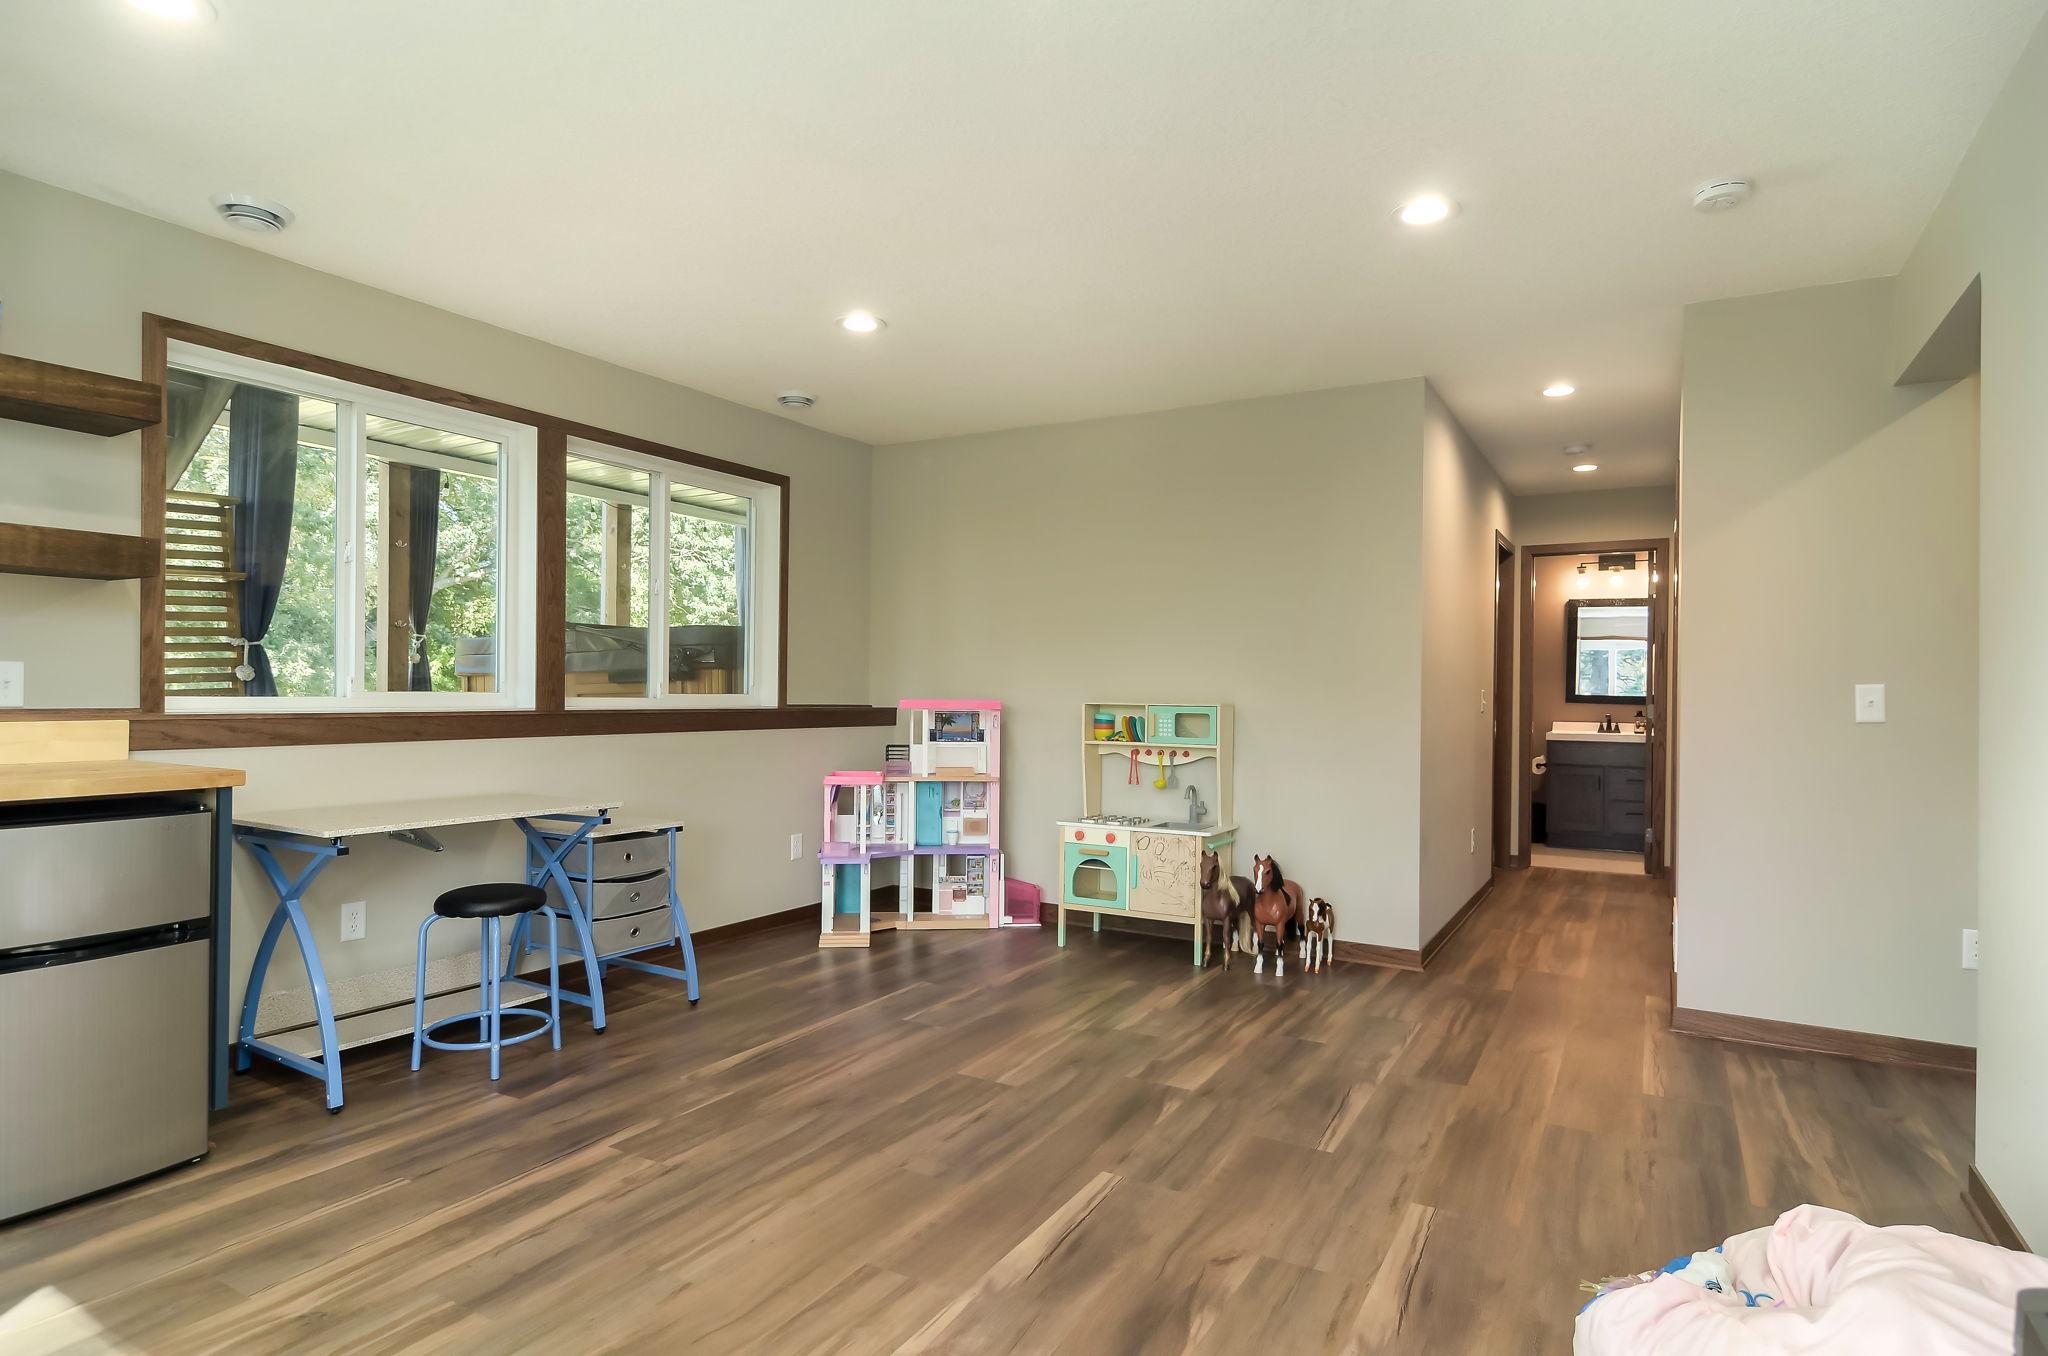 Inviting and just darn cute, the family room is a great play room or hangout space.